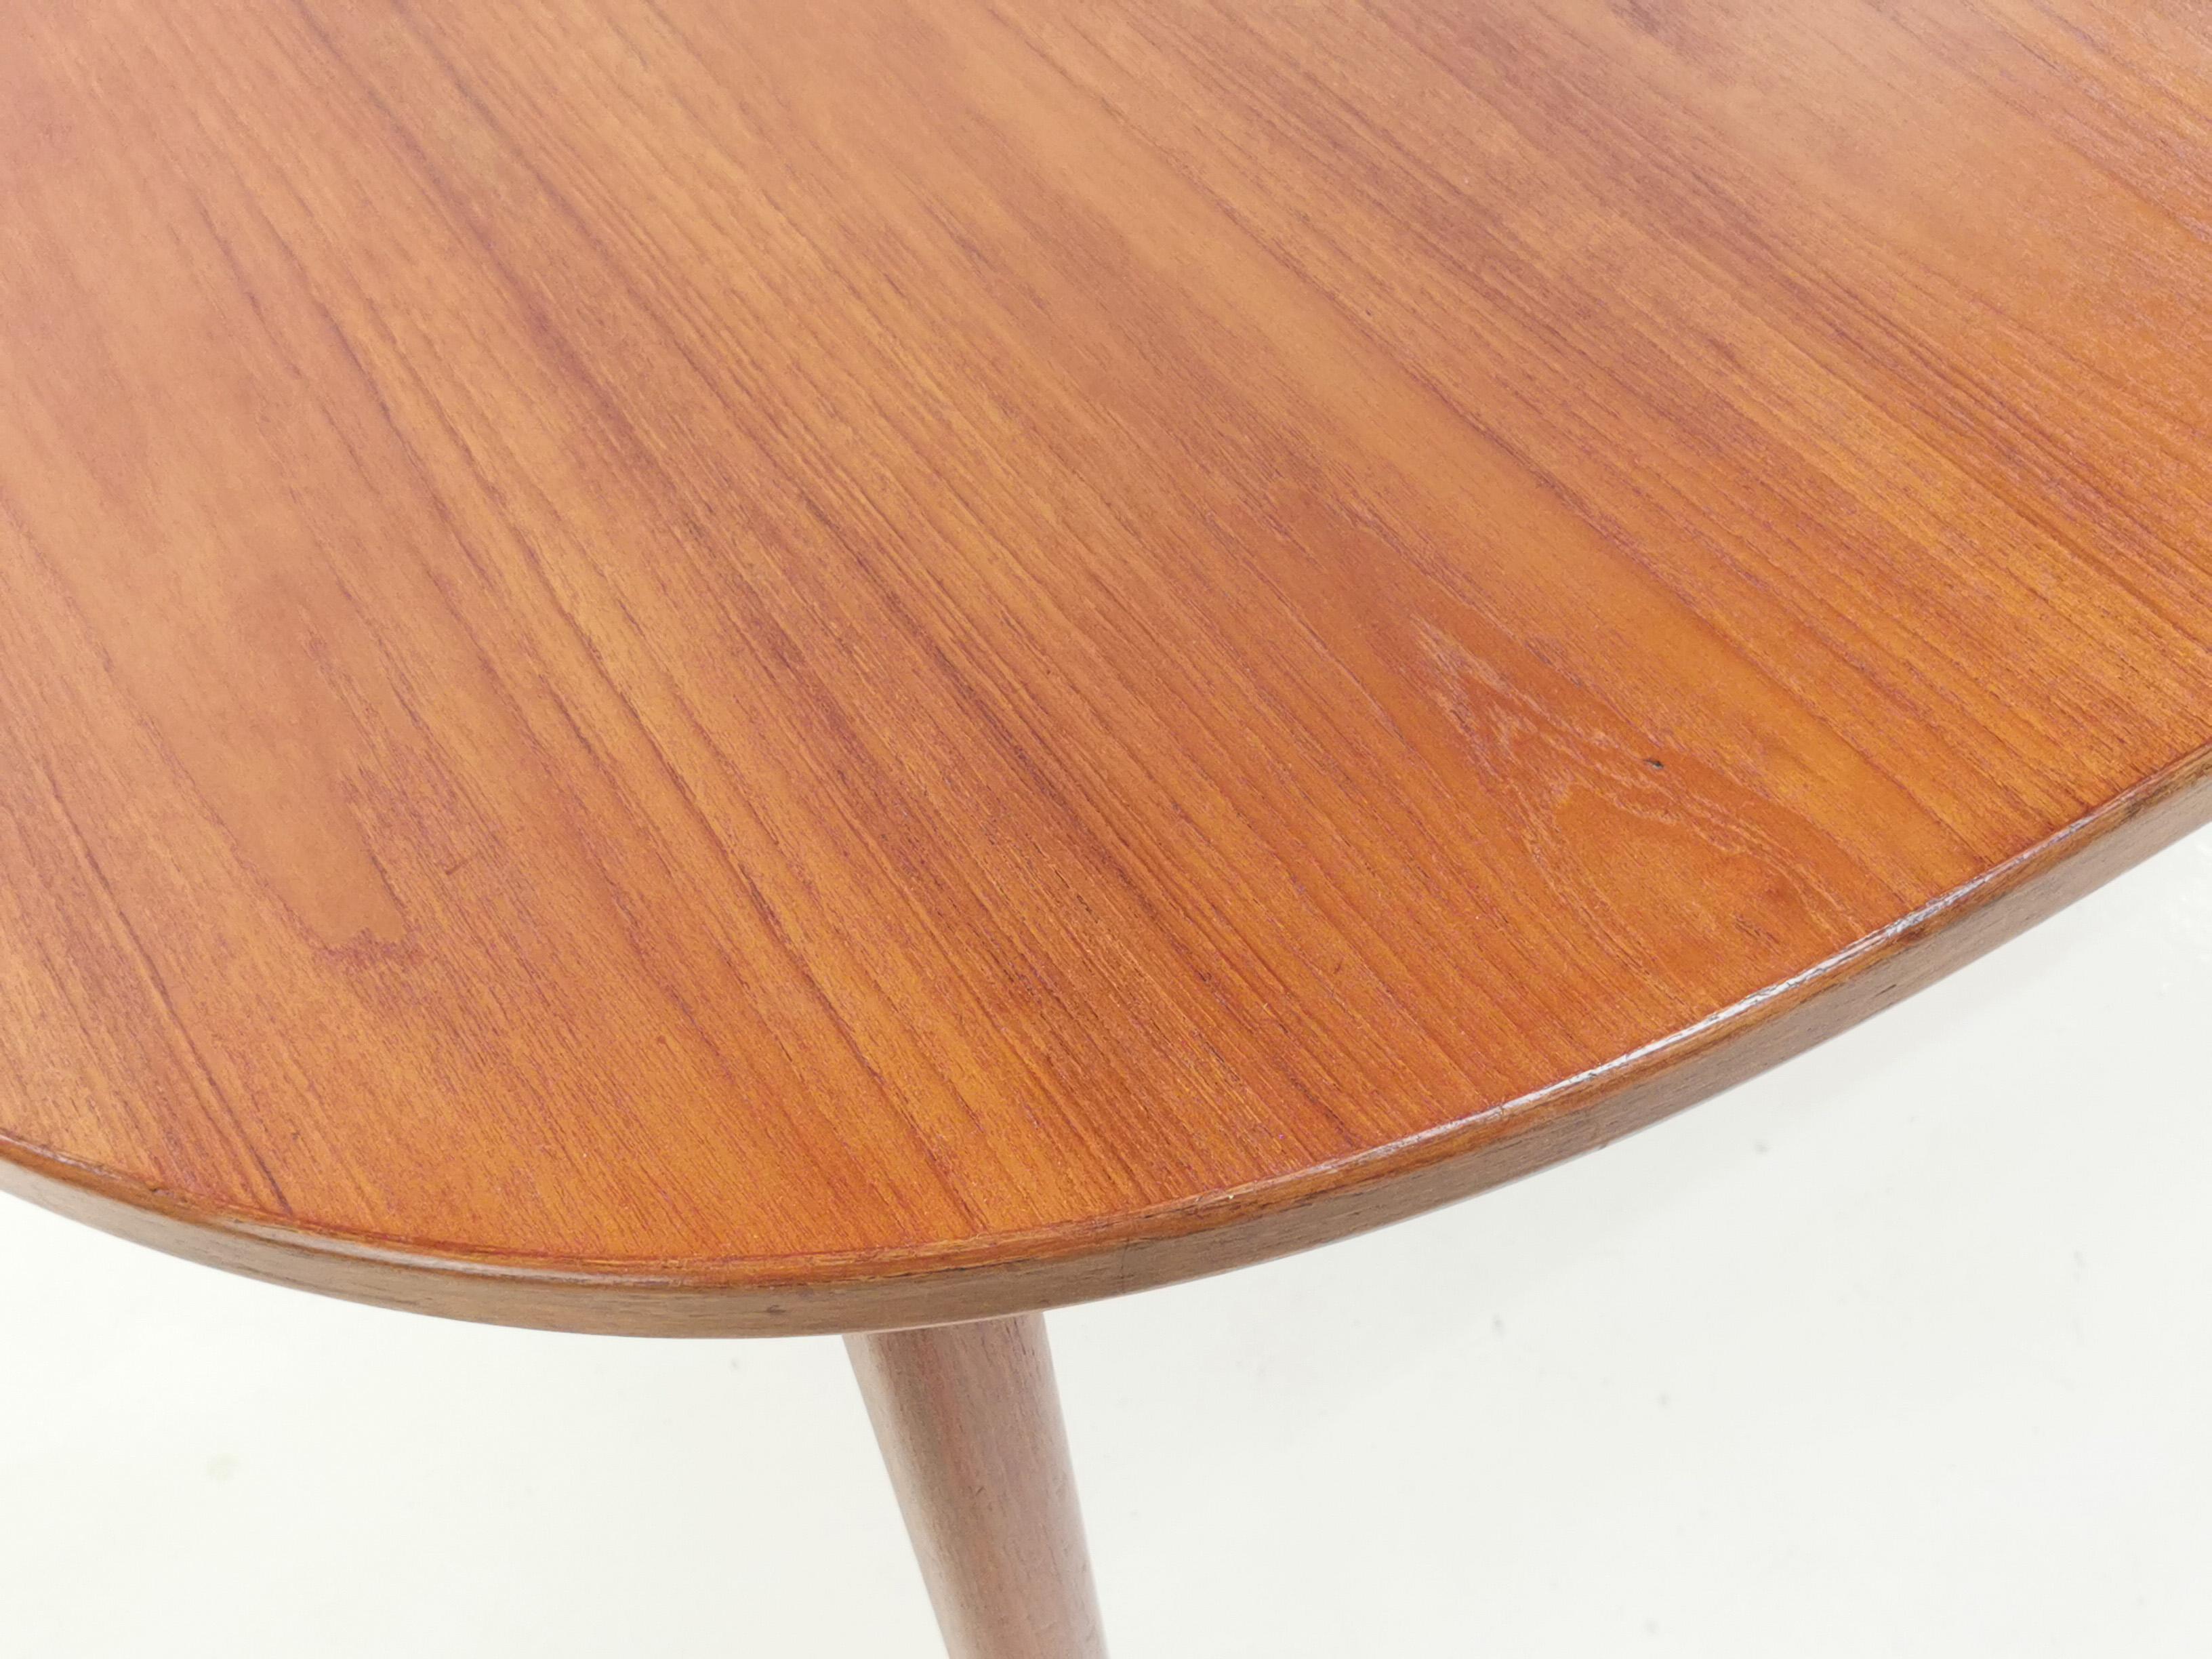 British 1970s Teak Extending Dining Table by Nils Jonsson for Troeds Midcentury